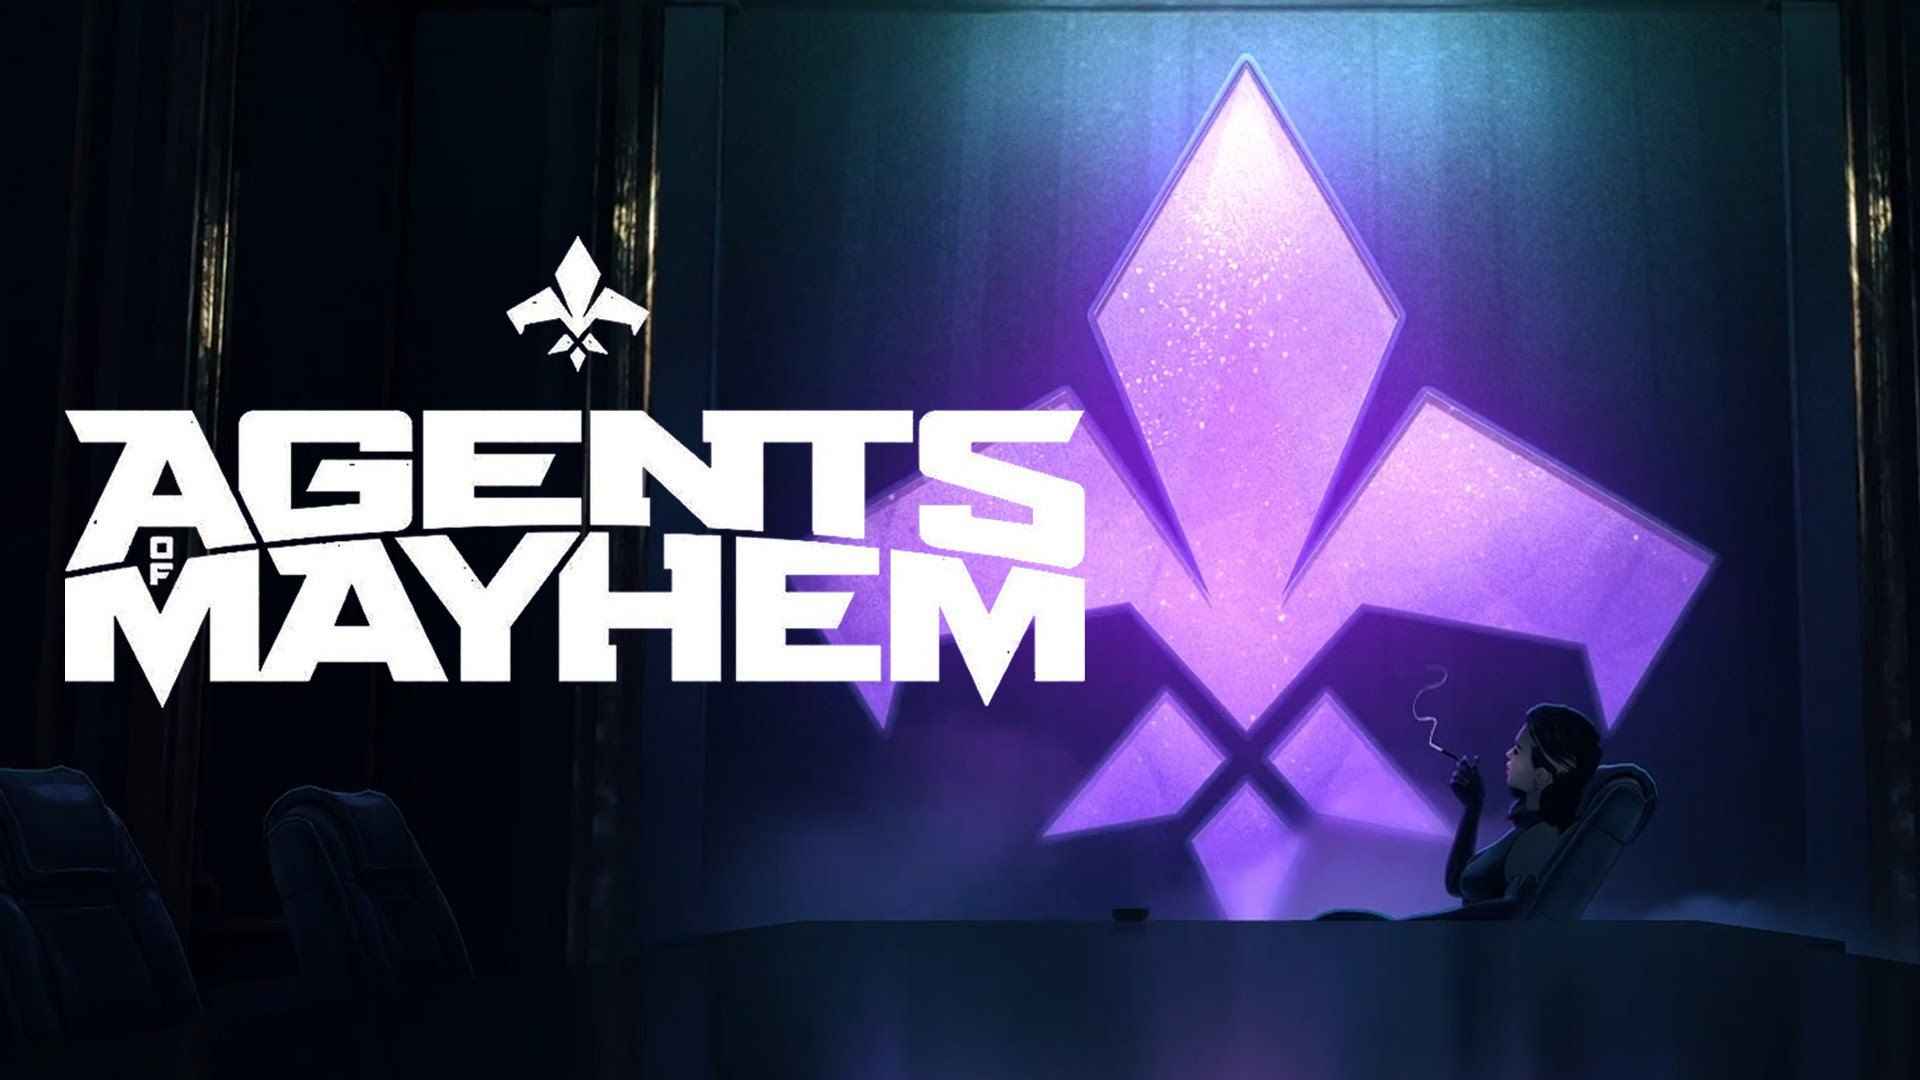 Agents of Mayhem Wallpaper Image Photo Picture Background